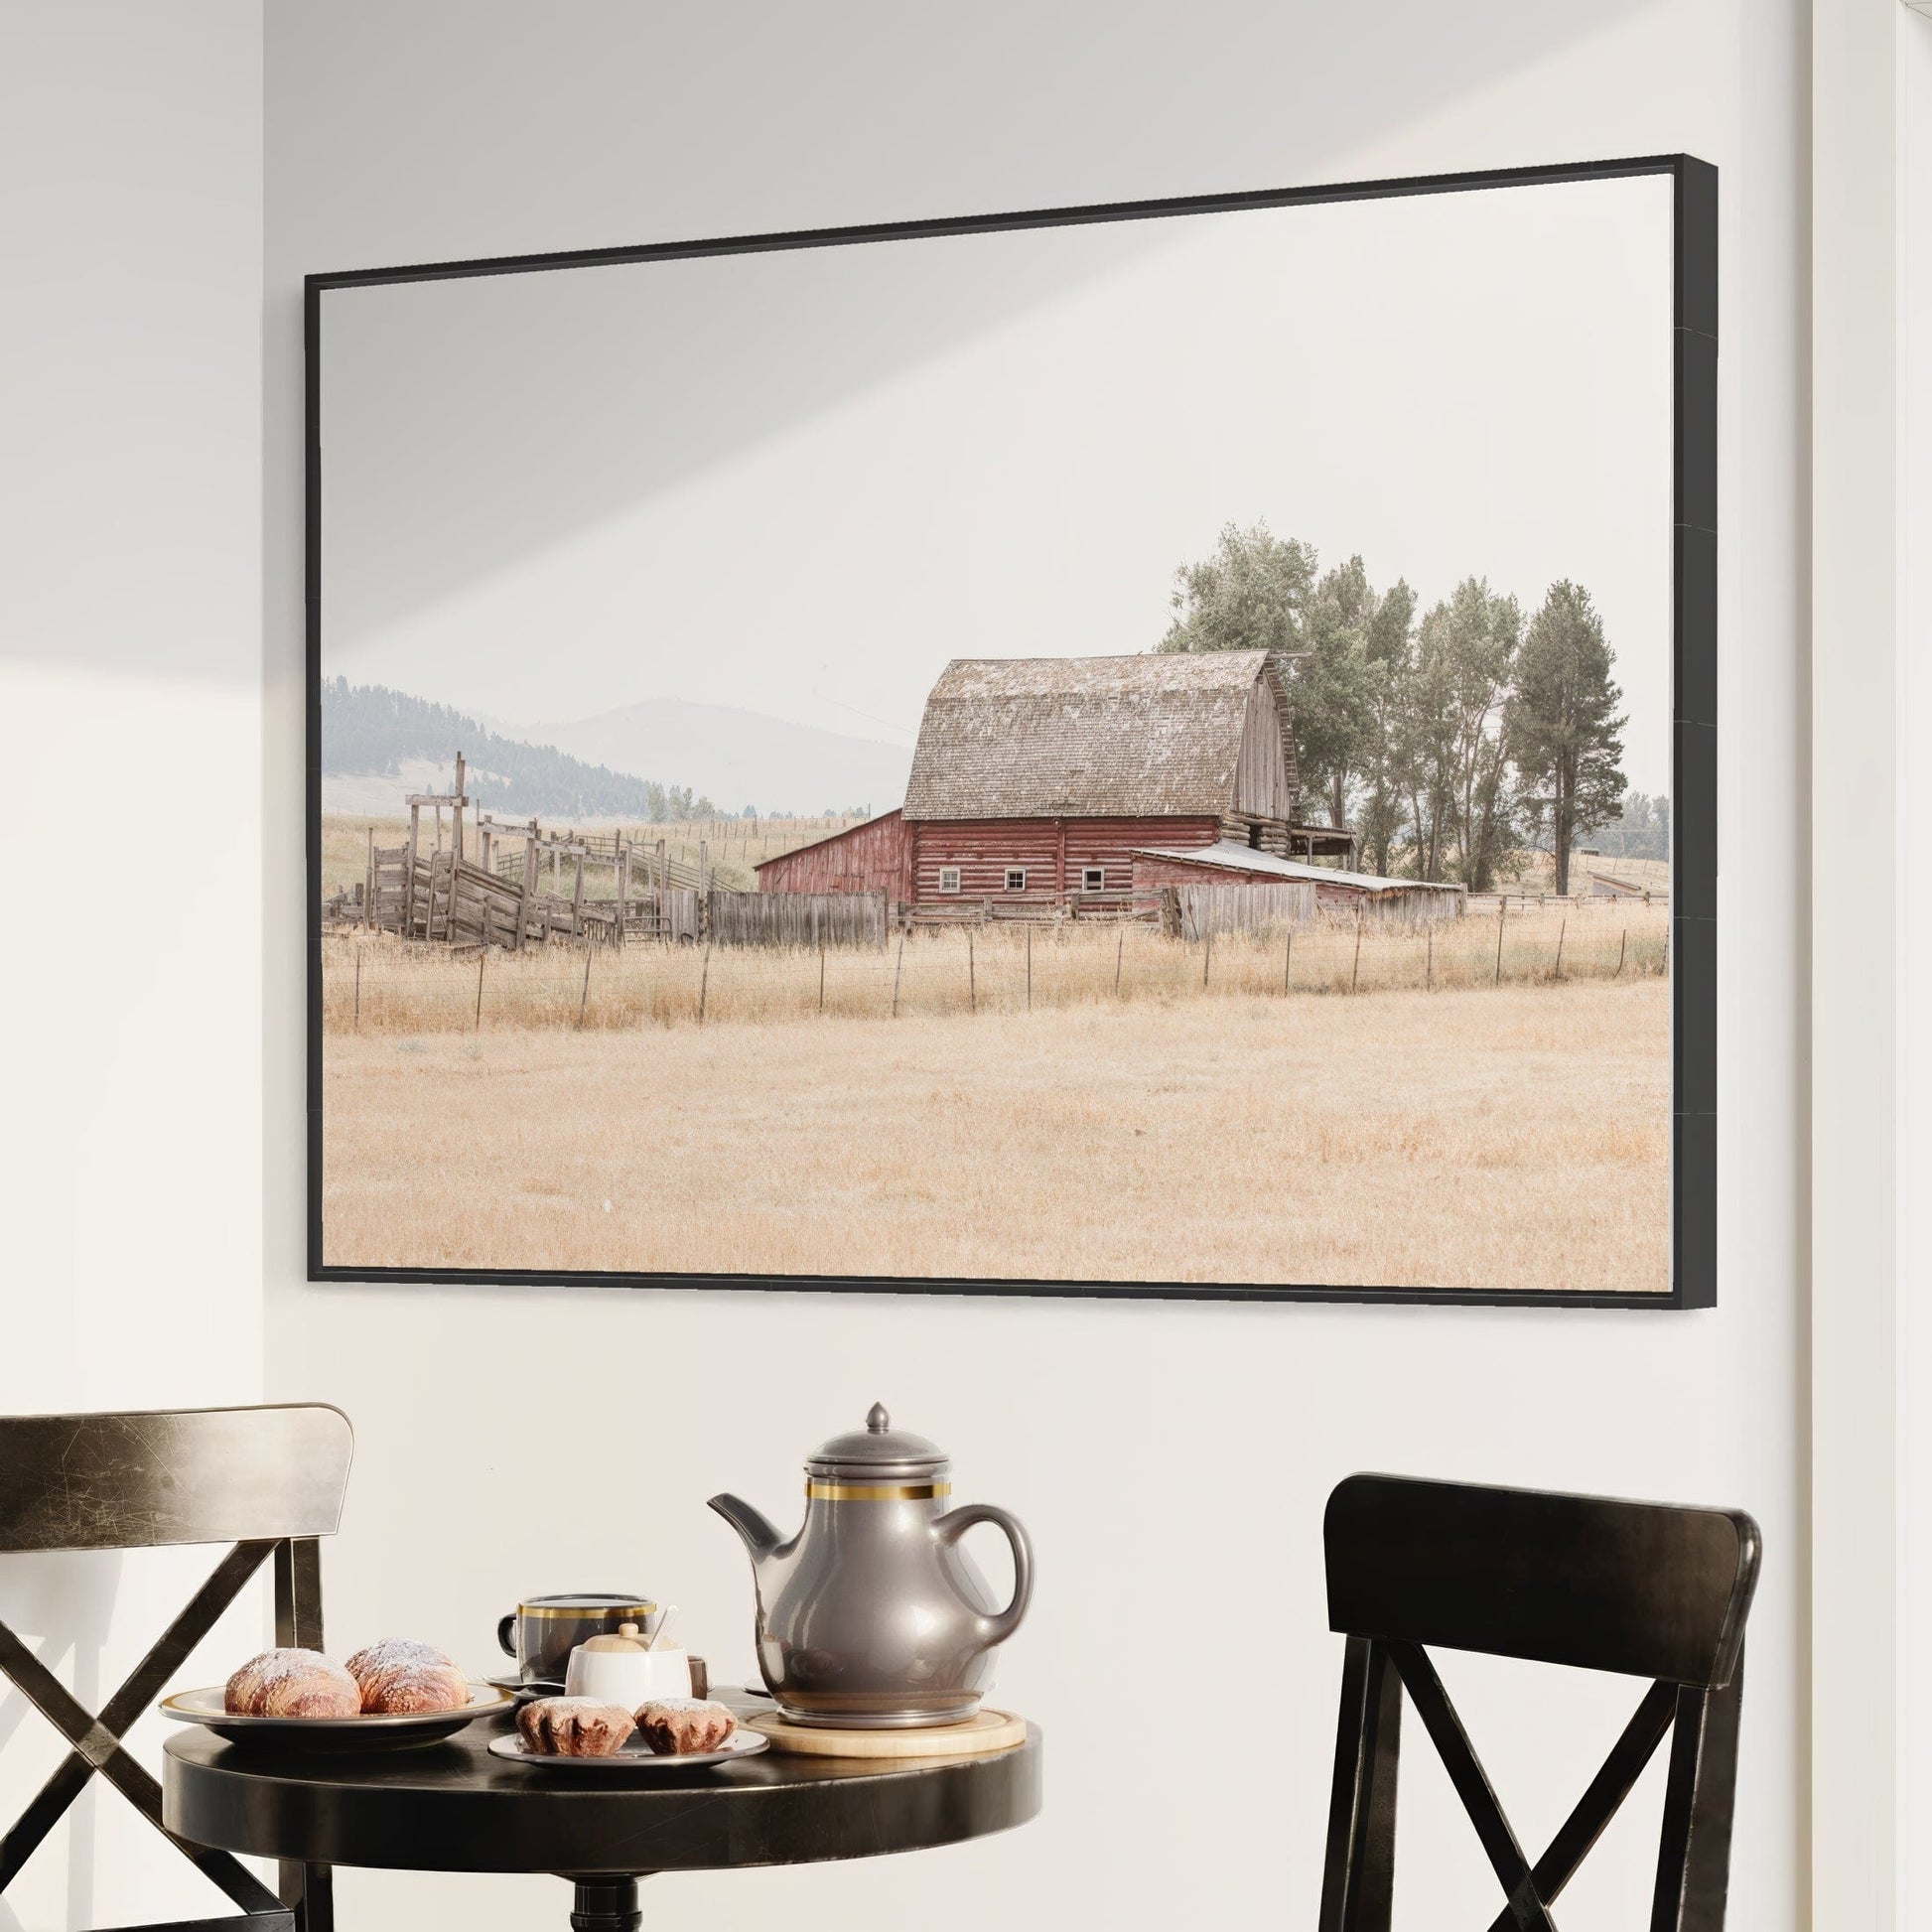 Rustic Dining Room Decor - Old Red Barn Wall Art Teri James Photography